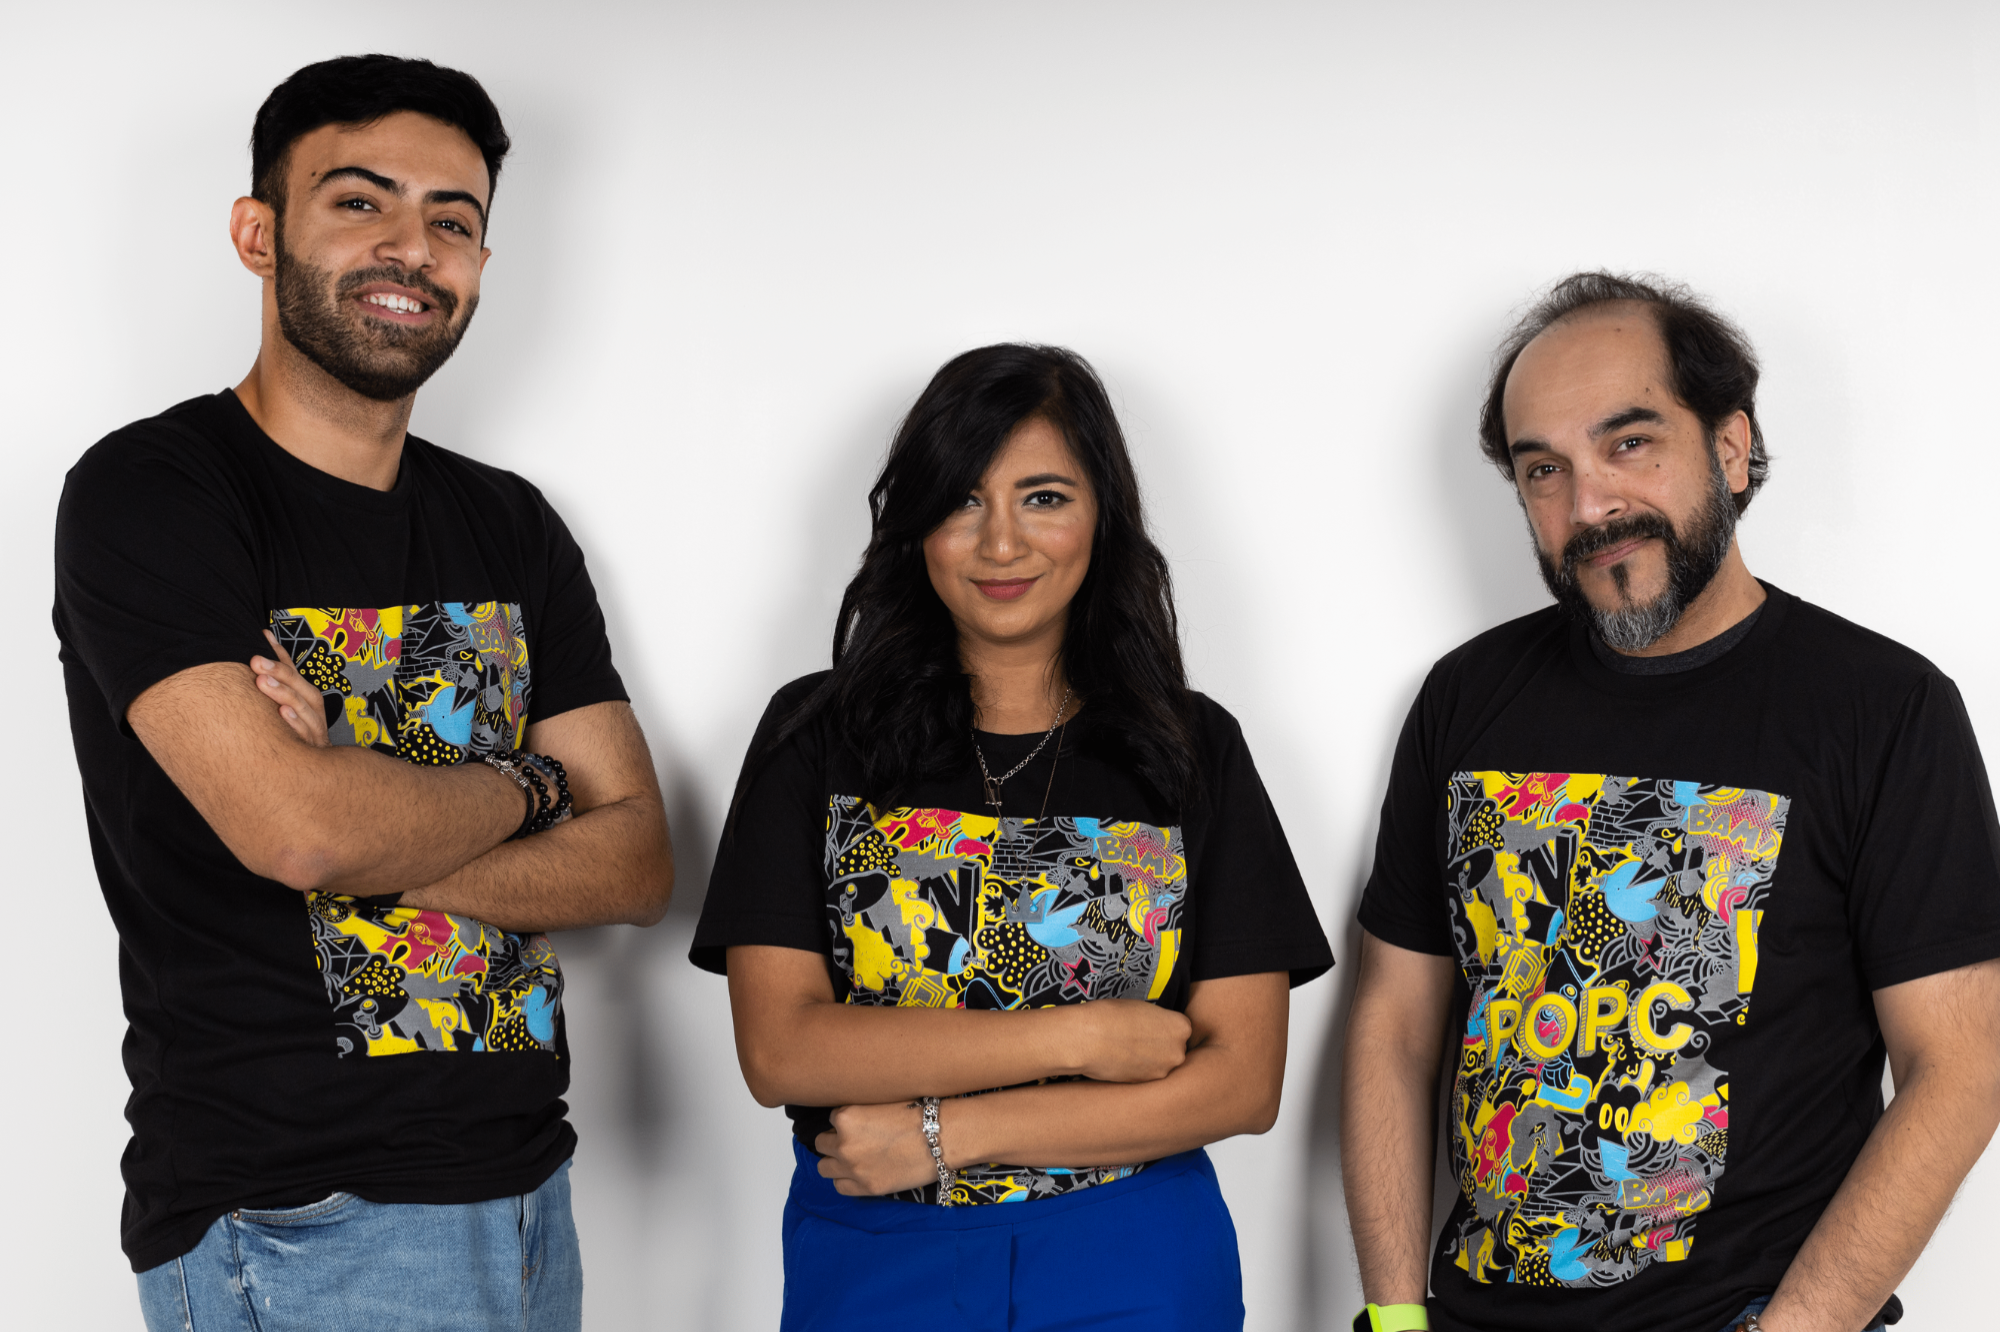 UAE-Based Online Marketplace POPC Is Helping Independent Pop Culture Artists Showcase Their Work Year-Round